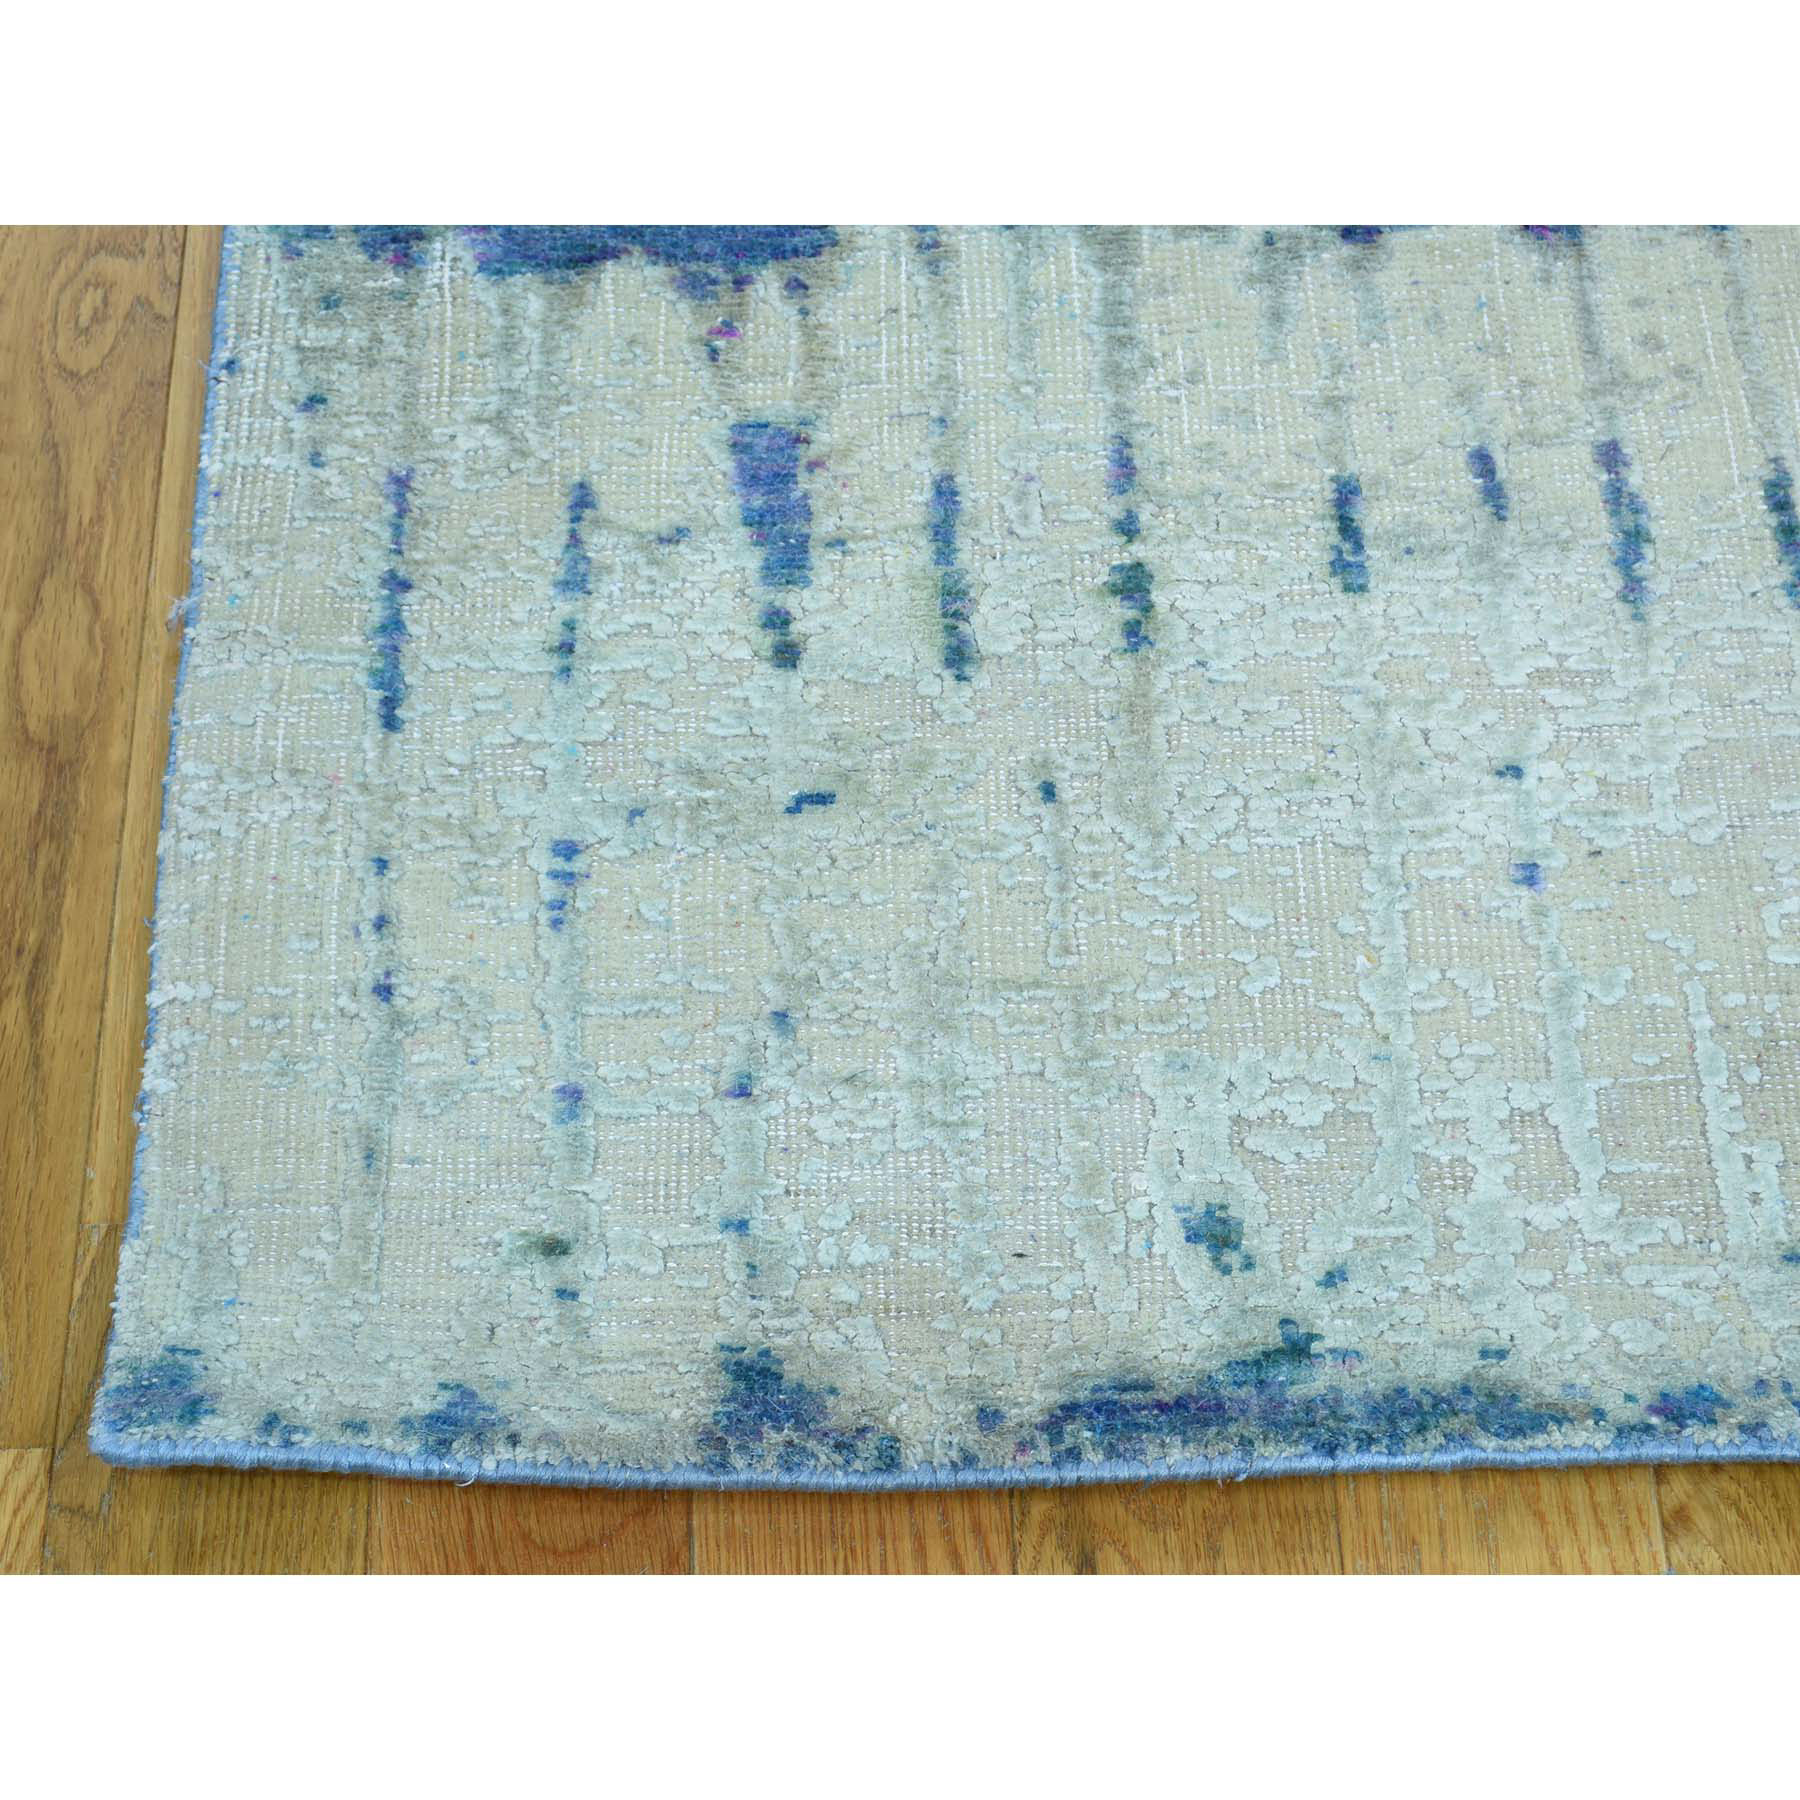 3-x10-1  THE CARDIAC Hand-Knotted Sari Silk with Textured Wool Runner Rug 